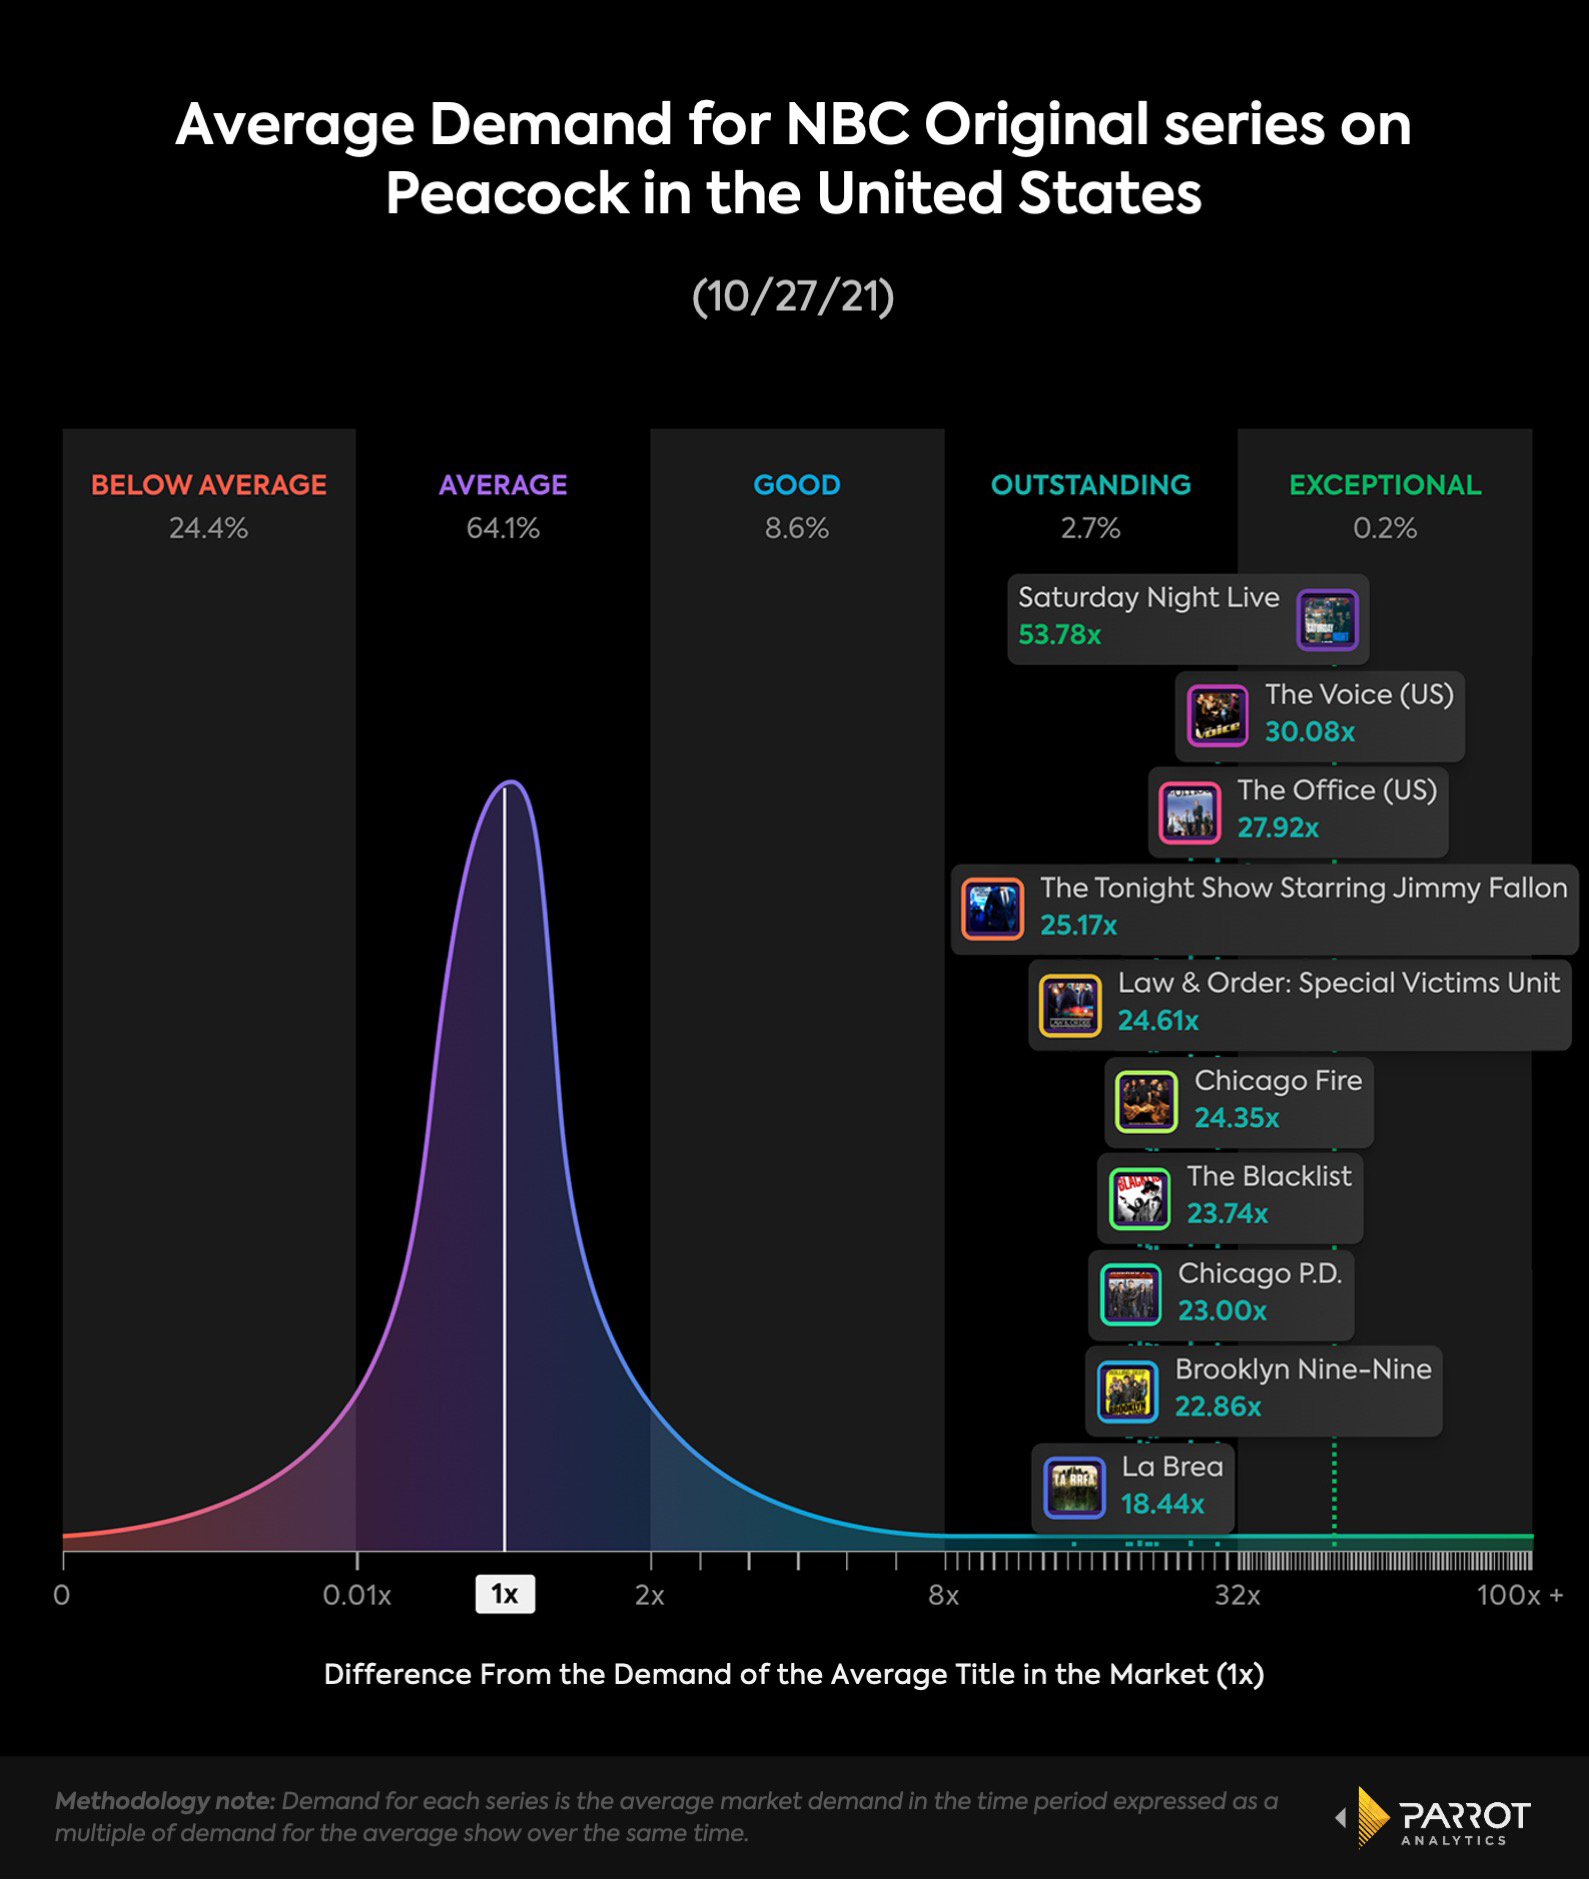 Parrot_Average Demand for NBC Original series on Peacock in the United States_2.jpg